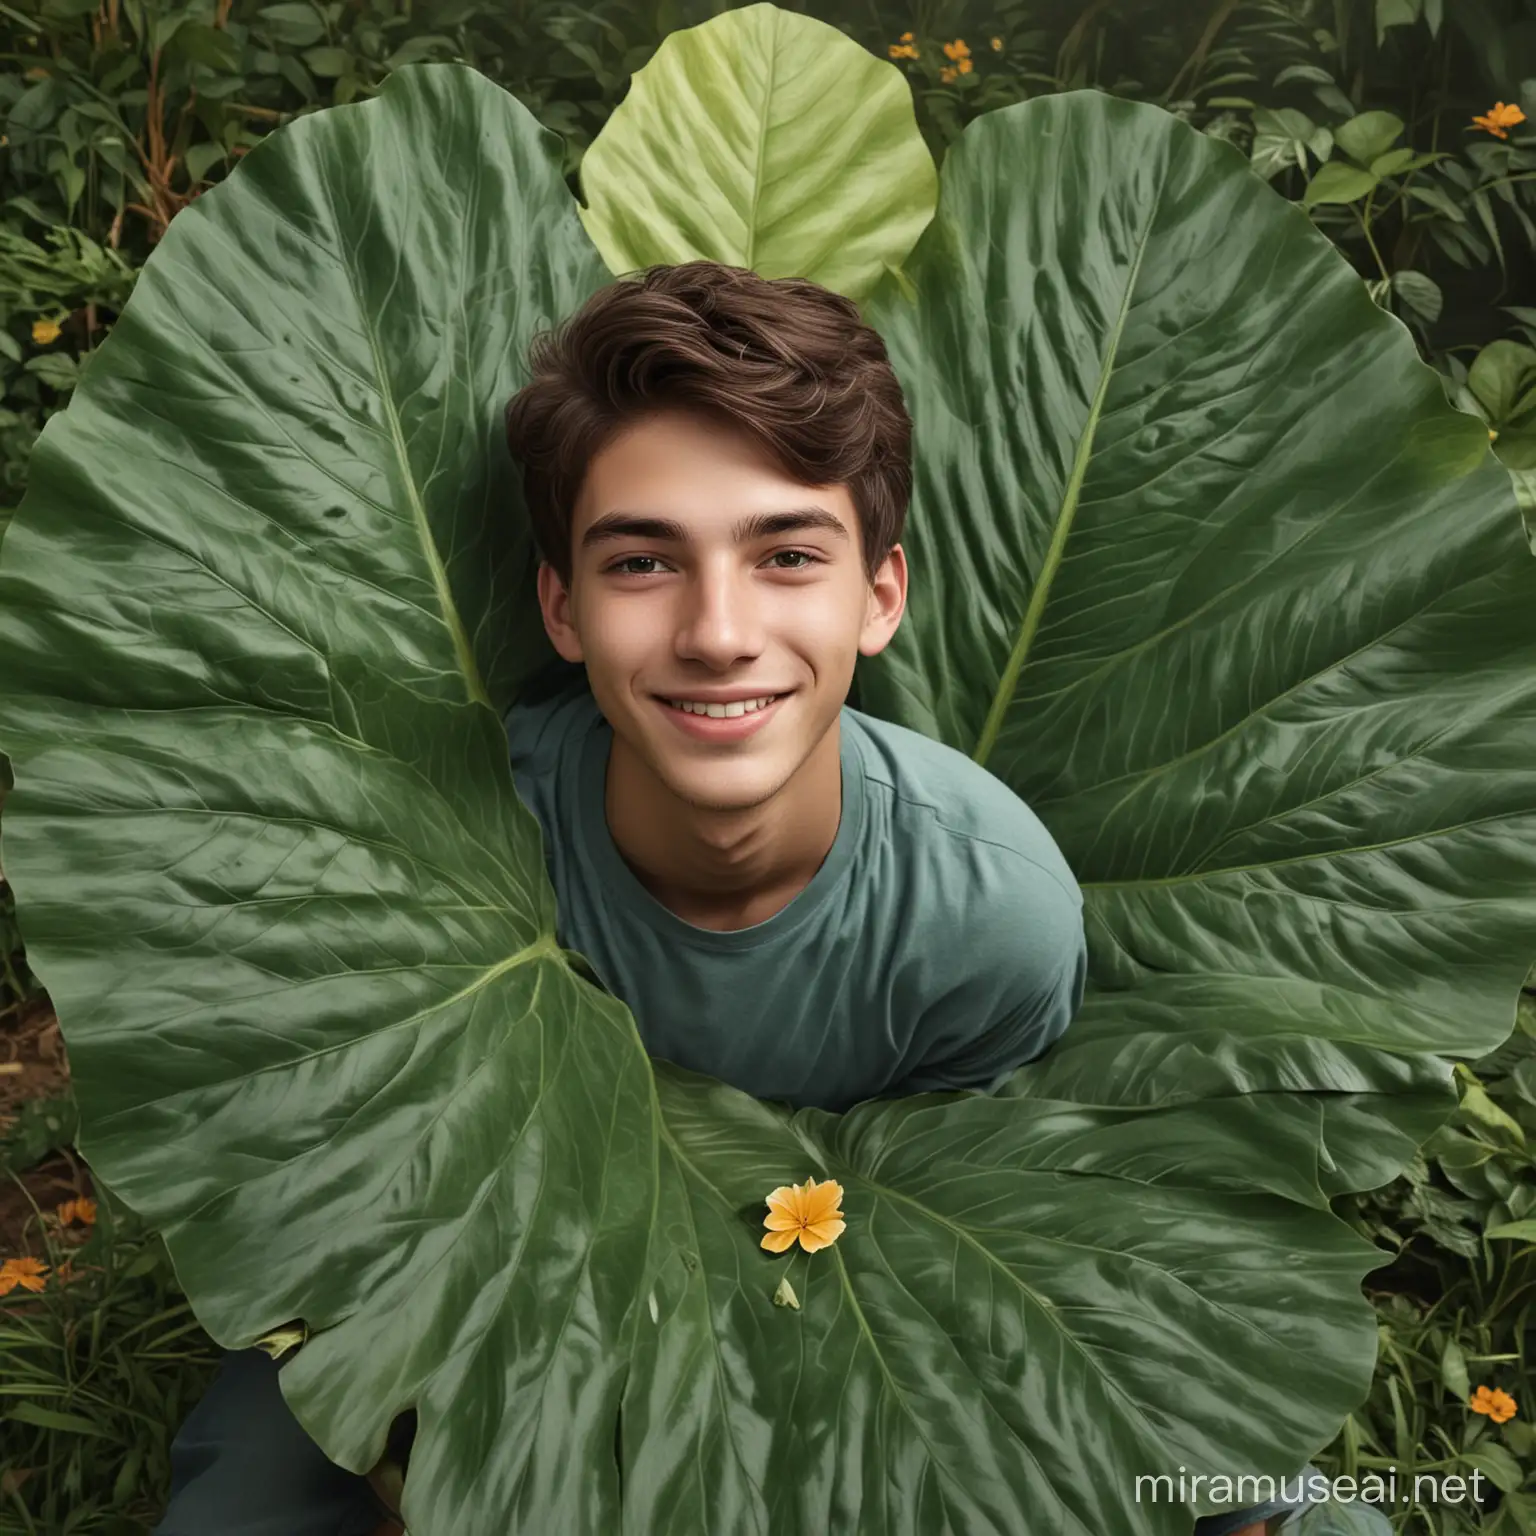 a handsome man, 18 years old, oval face, smiled shyly, sitting on a giant leaf and flower. Ultra Realistic